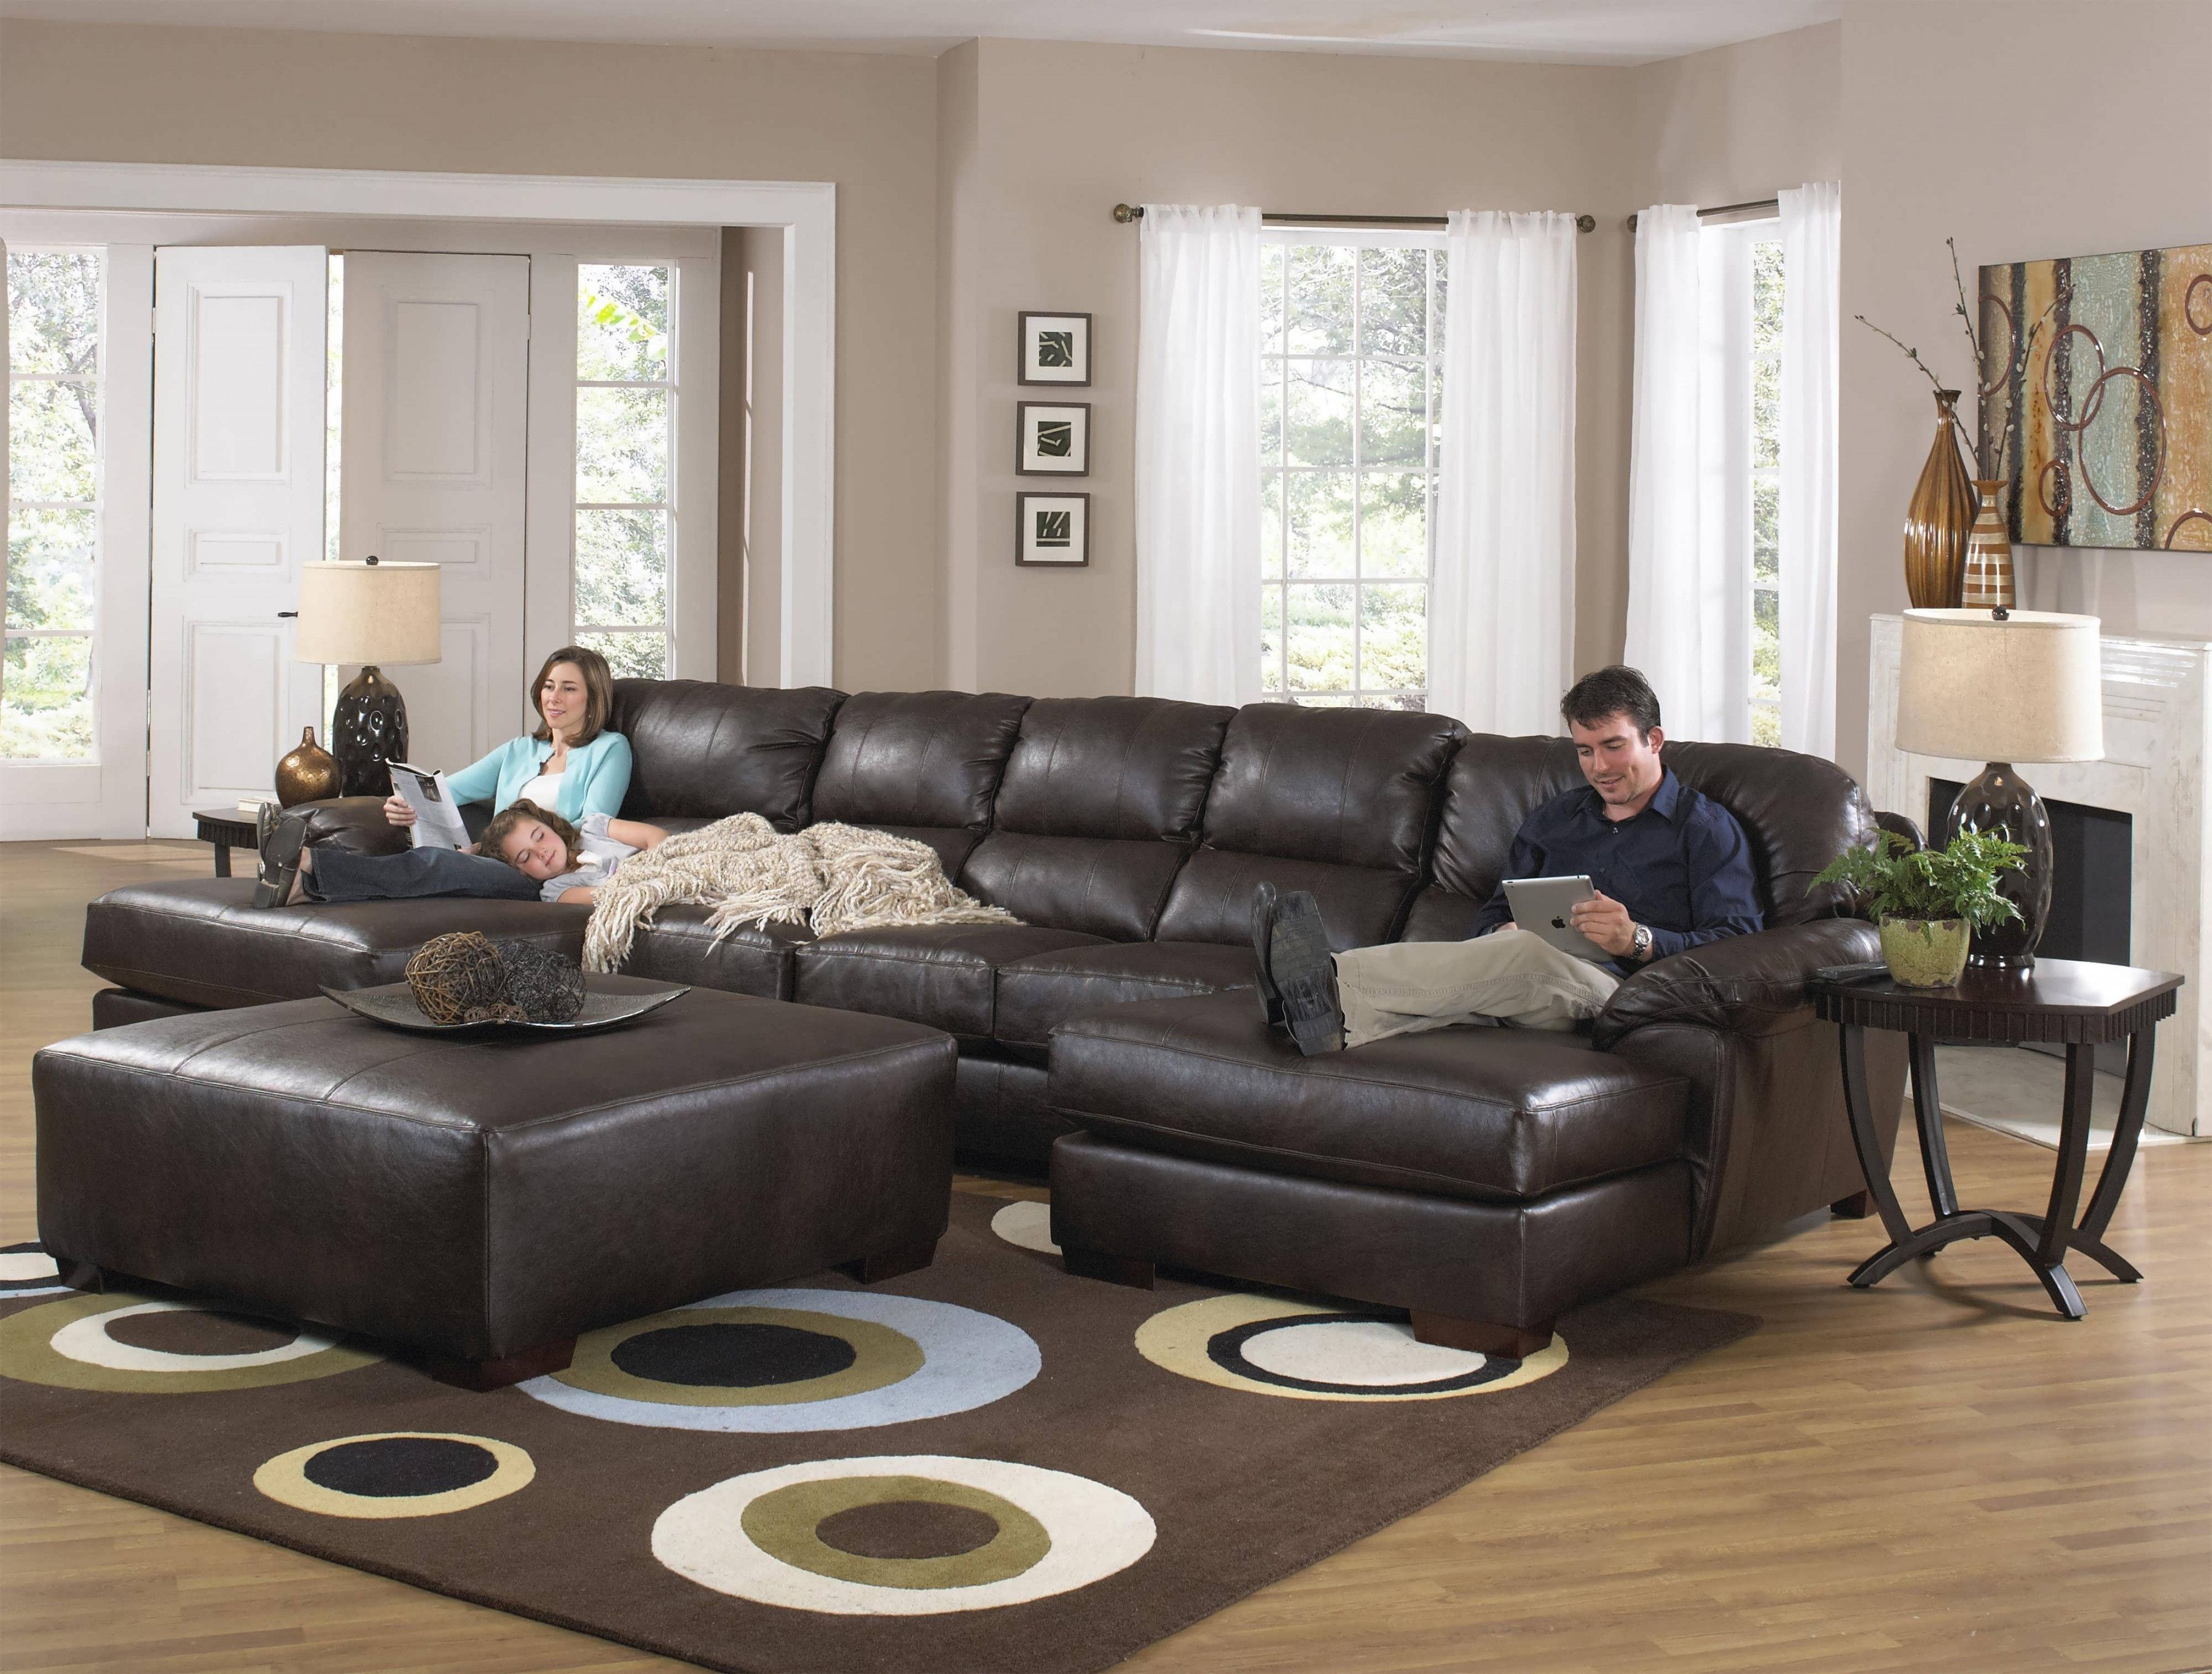 Sofa : U Shaped Sofa Reclining Sectional With Chaise Sleeper | Home Inside Reclining U Shaped Sectionals (View 7 of 15)